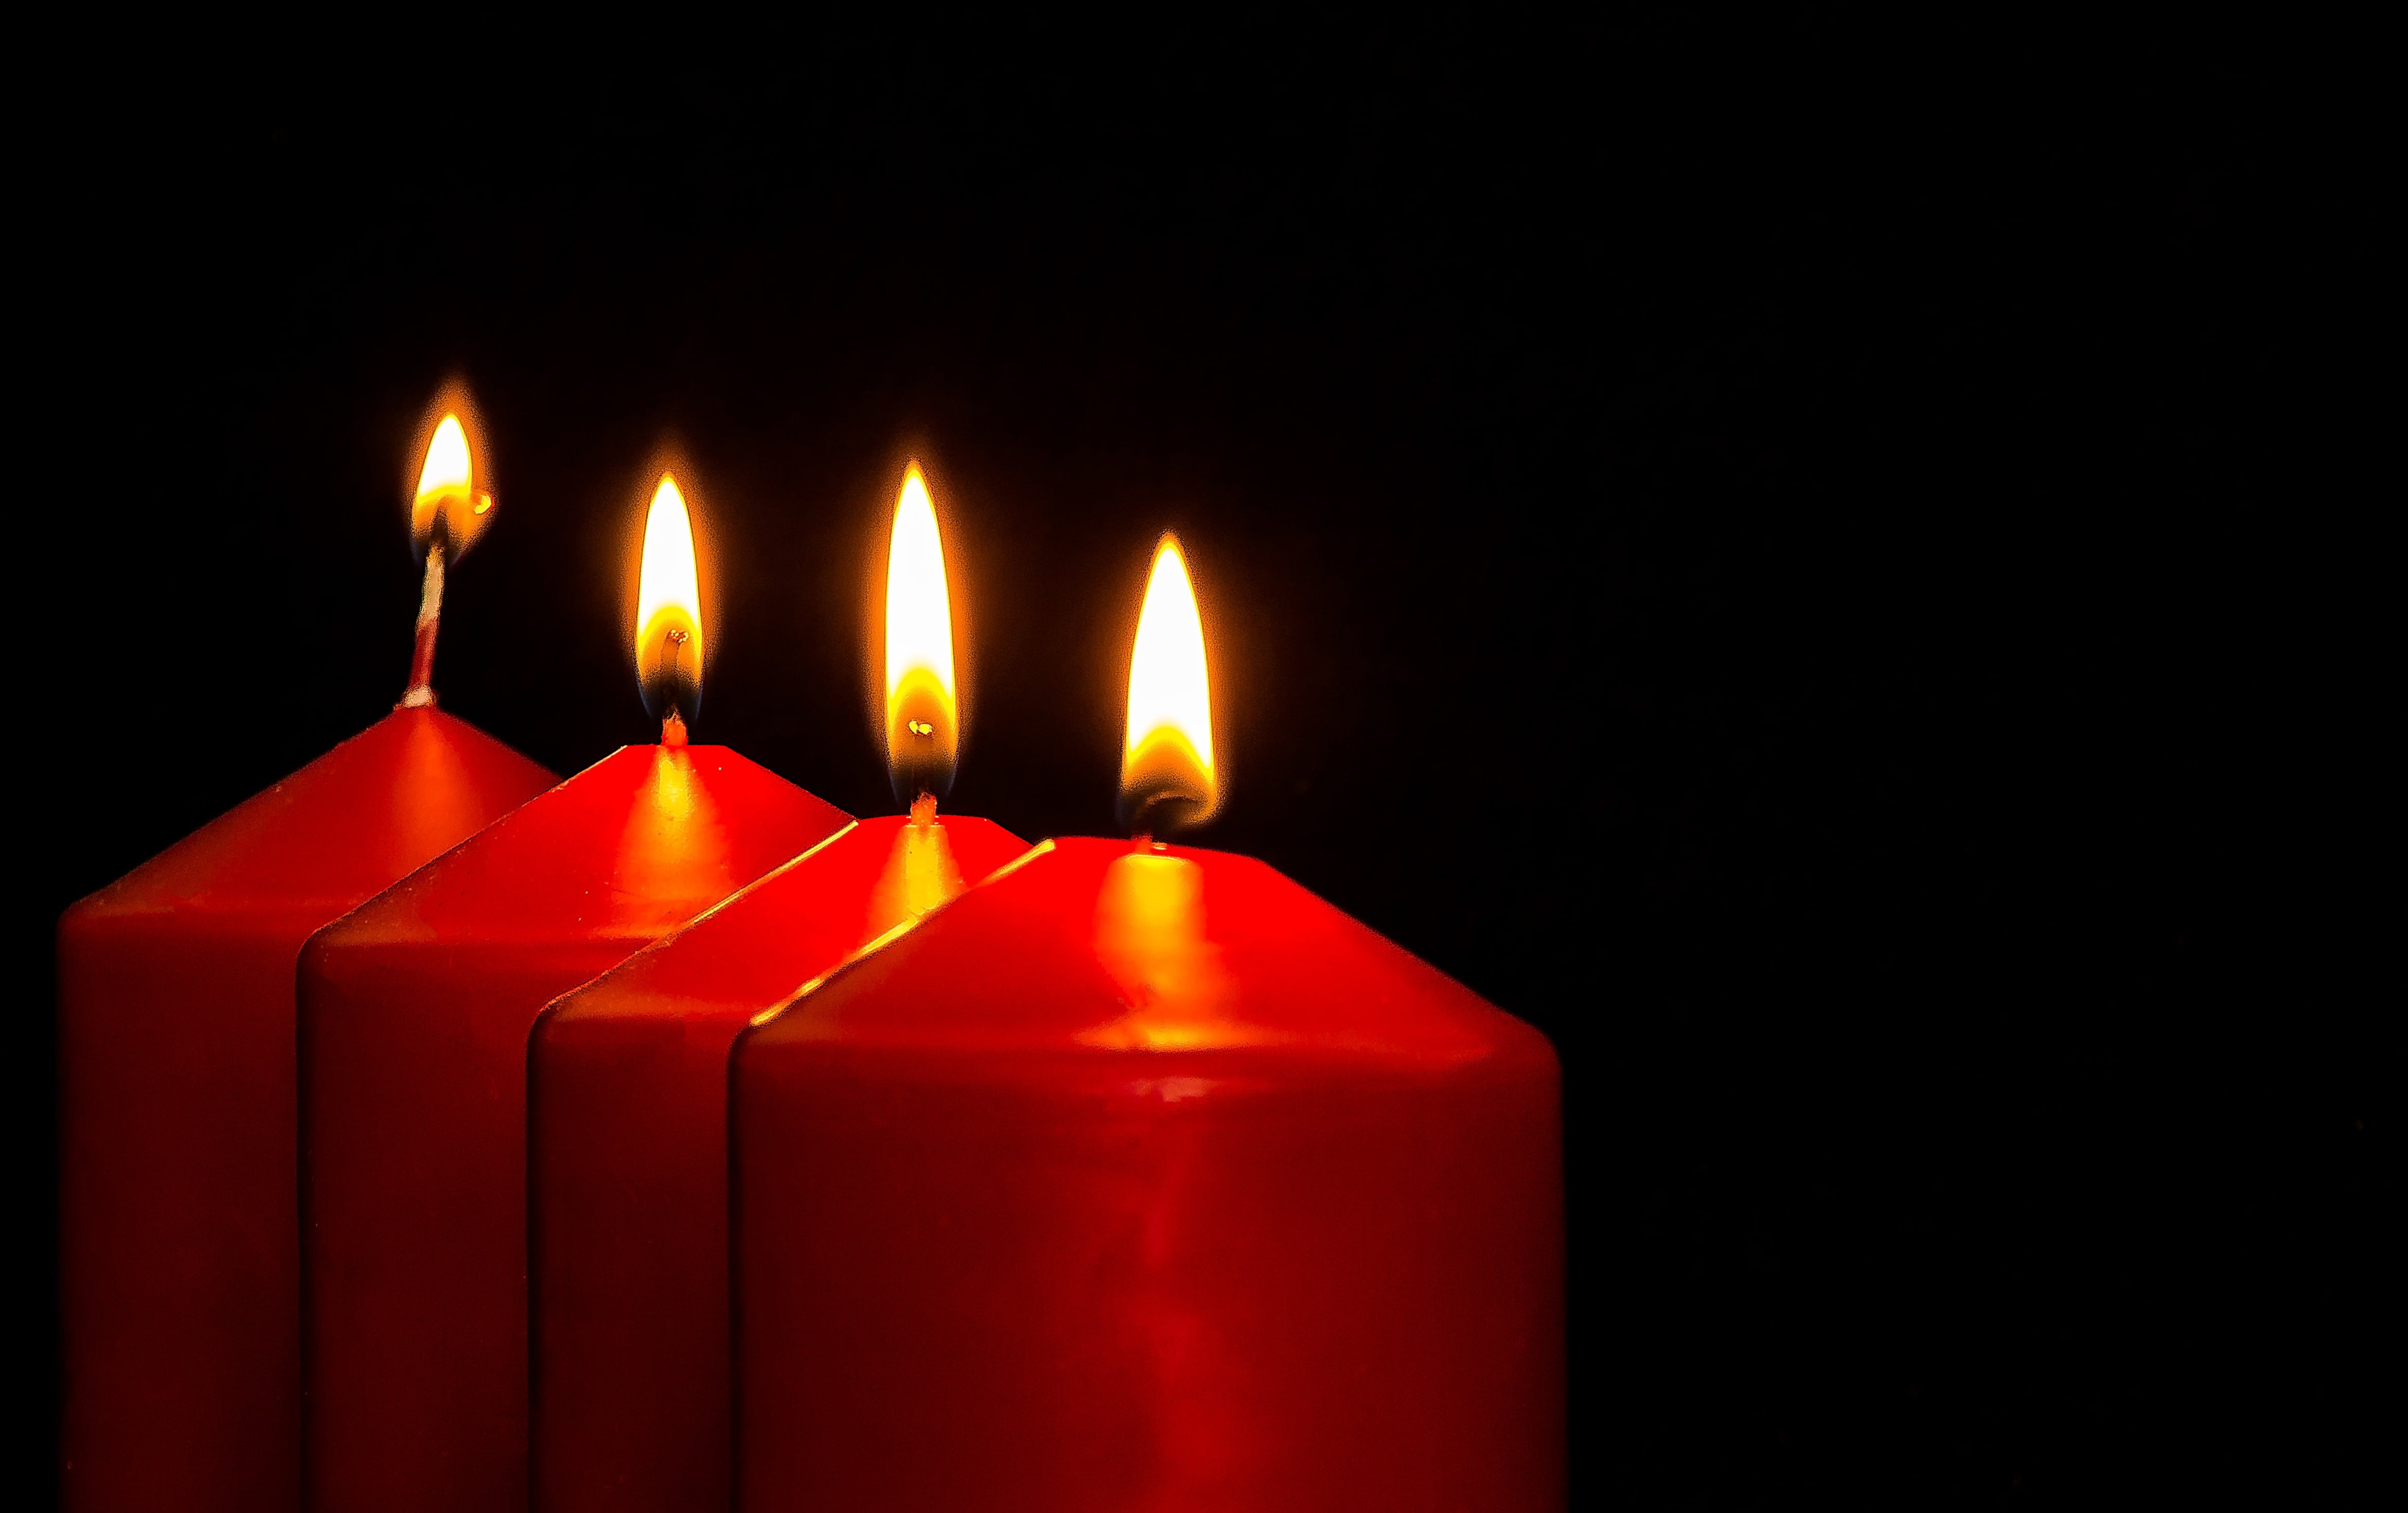 time lapse photography of four red pillar candles